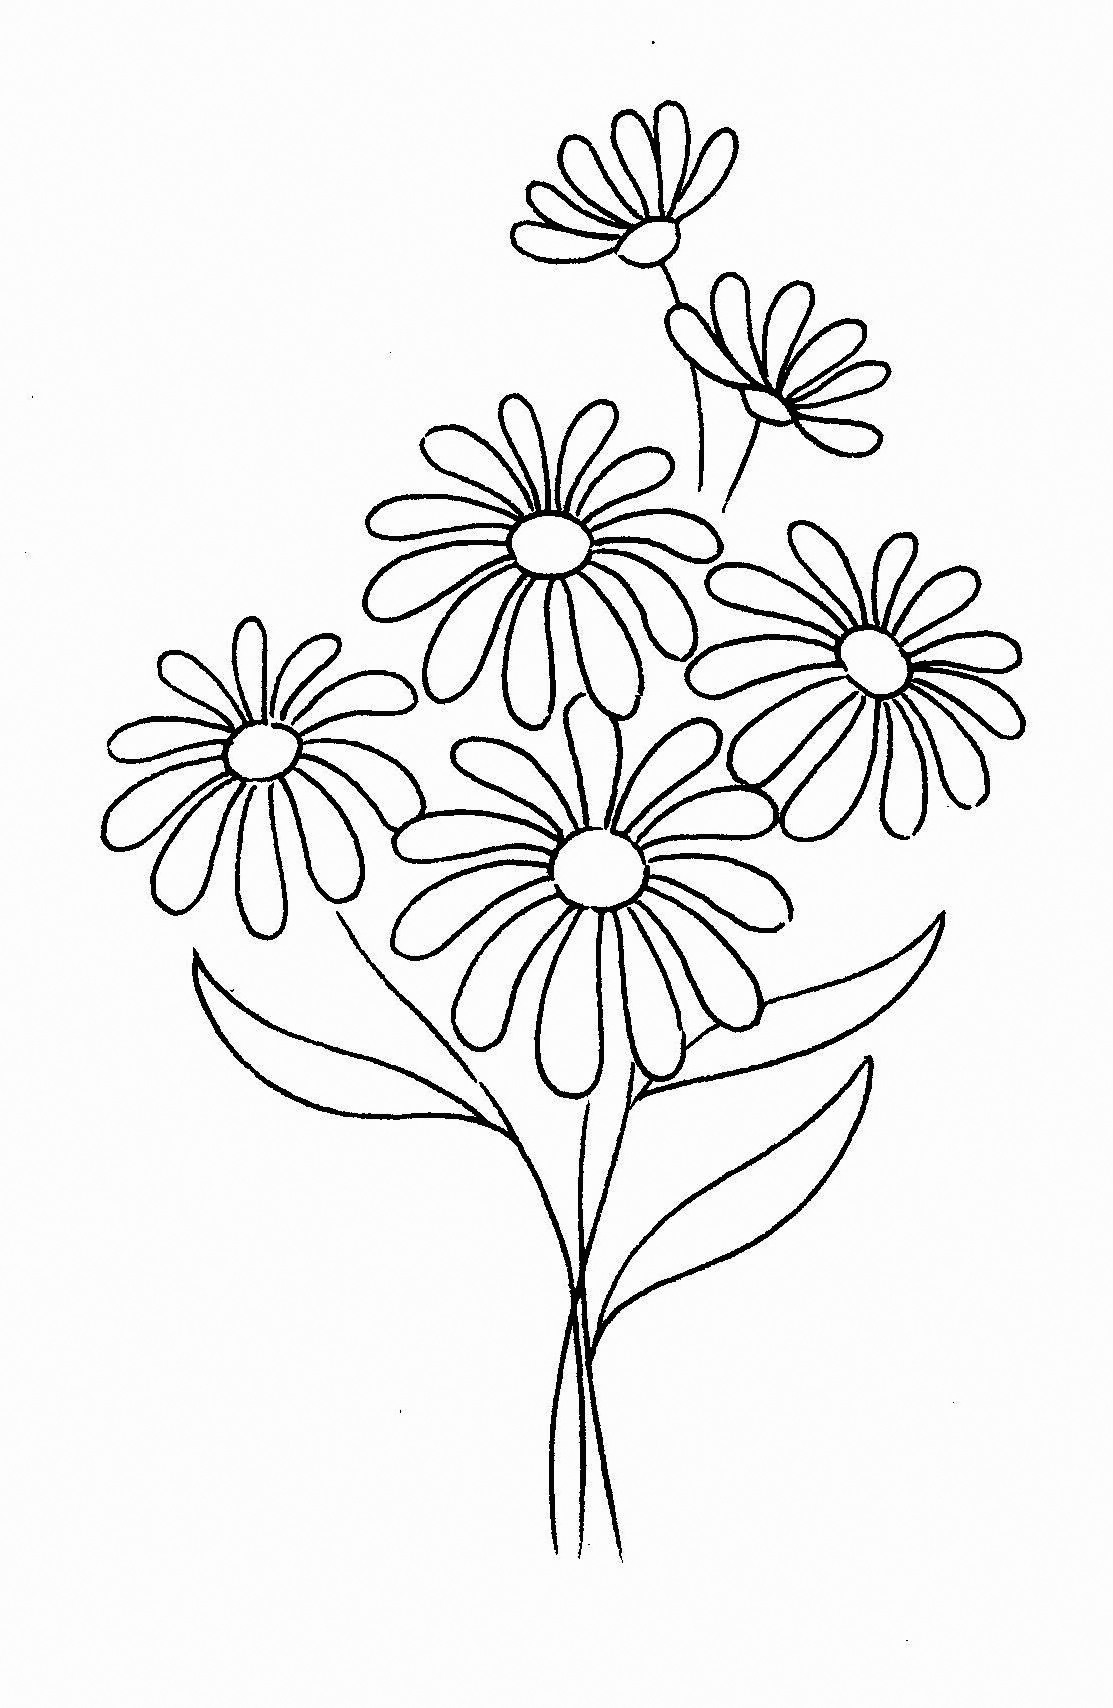 271 Simple Daisy Coloring Pages with Printable